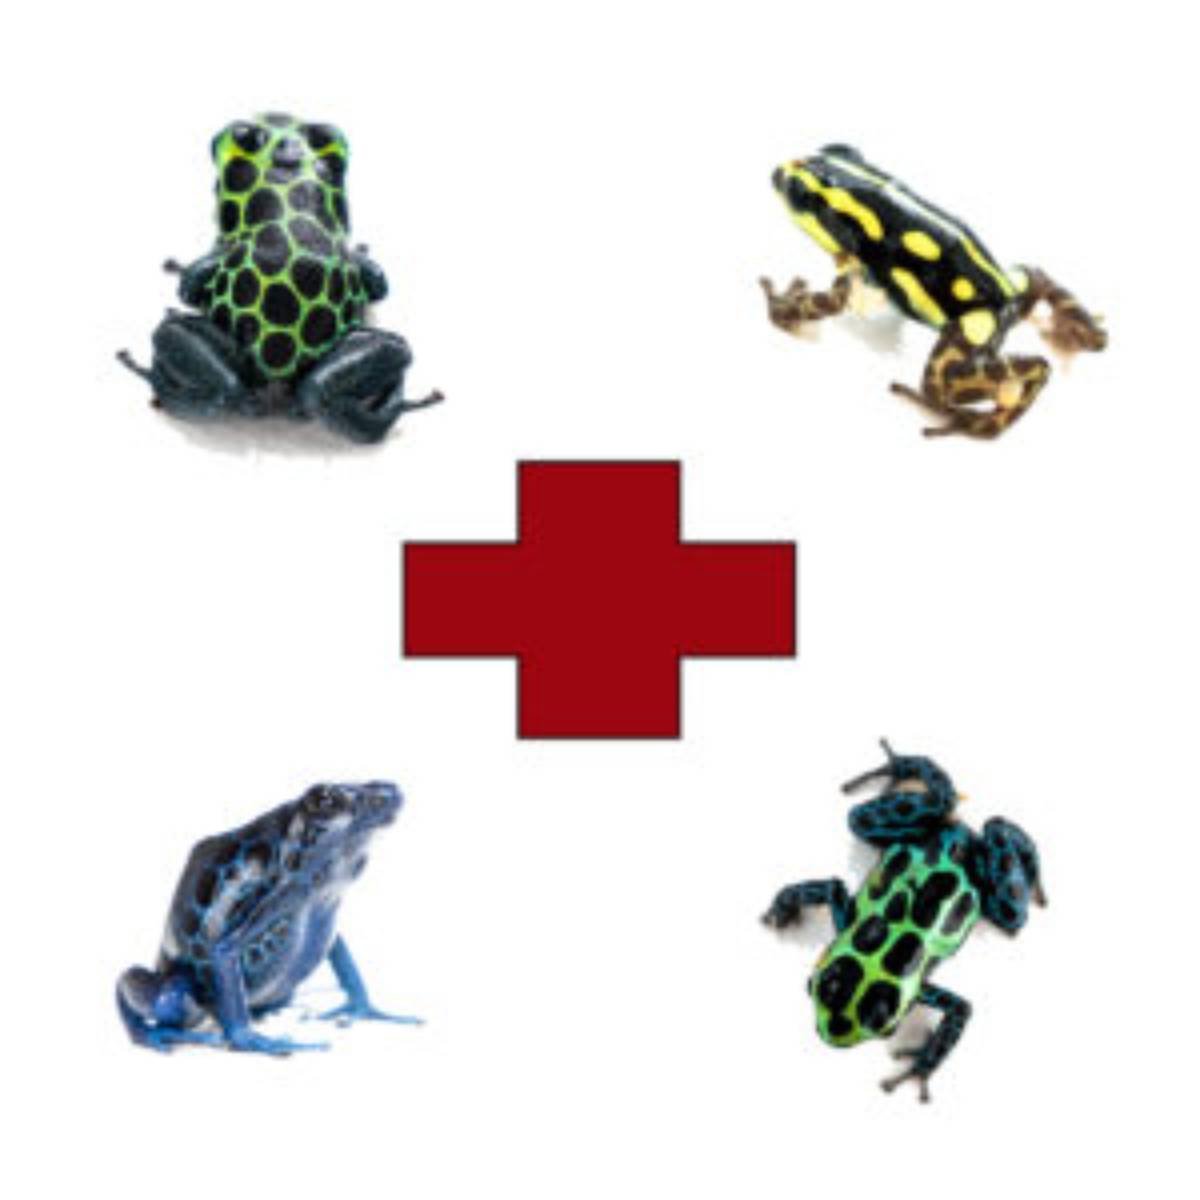 hospital bins for your dart frogs